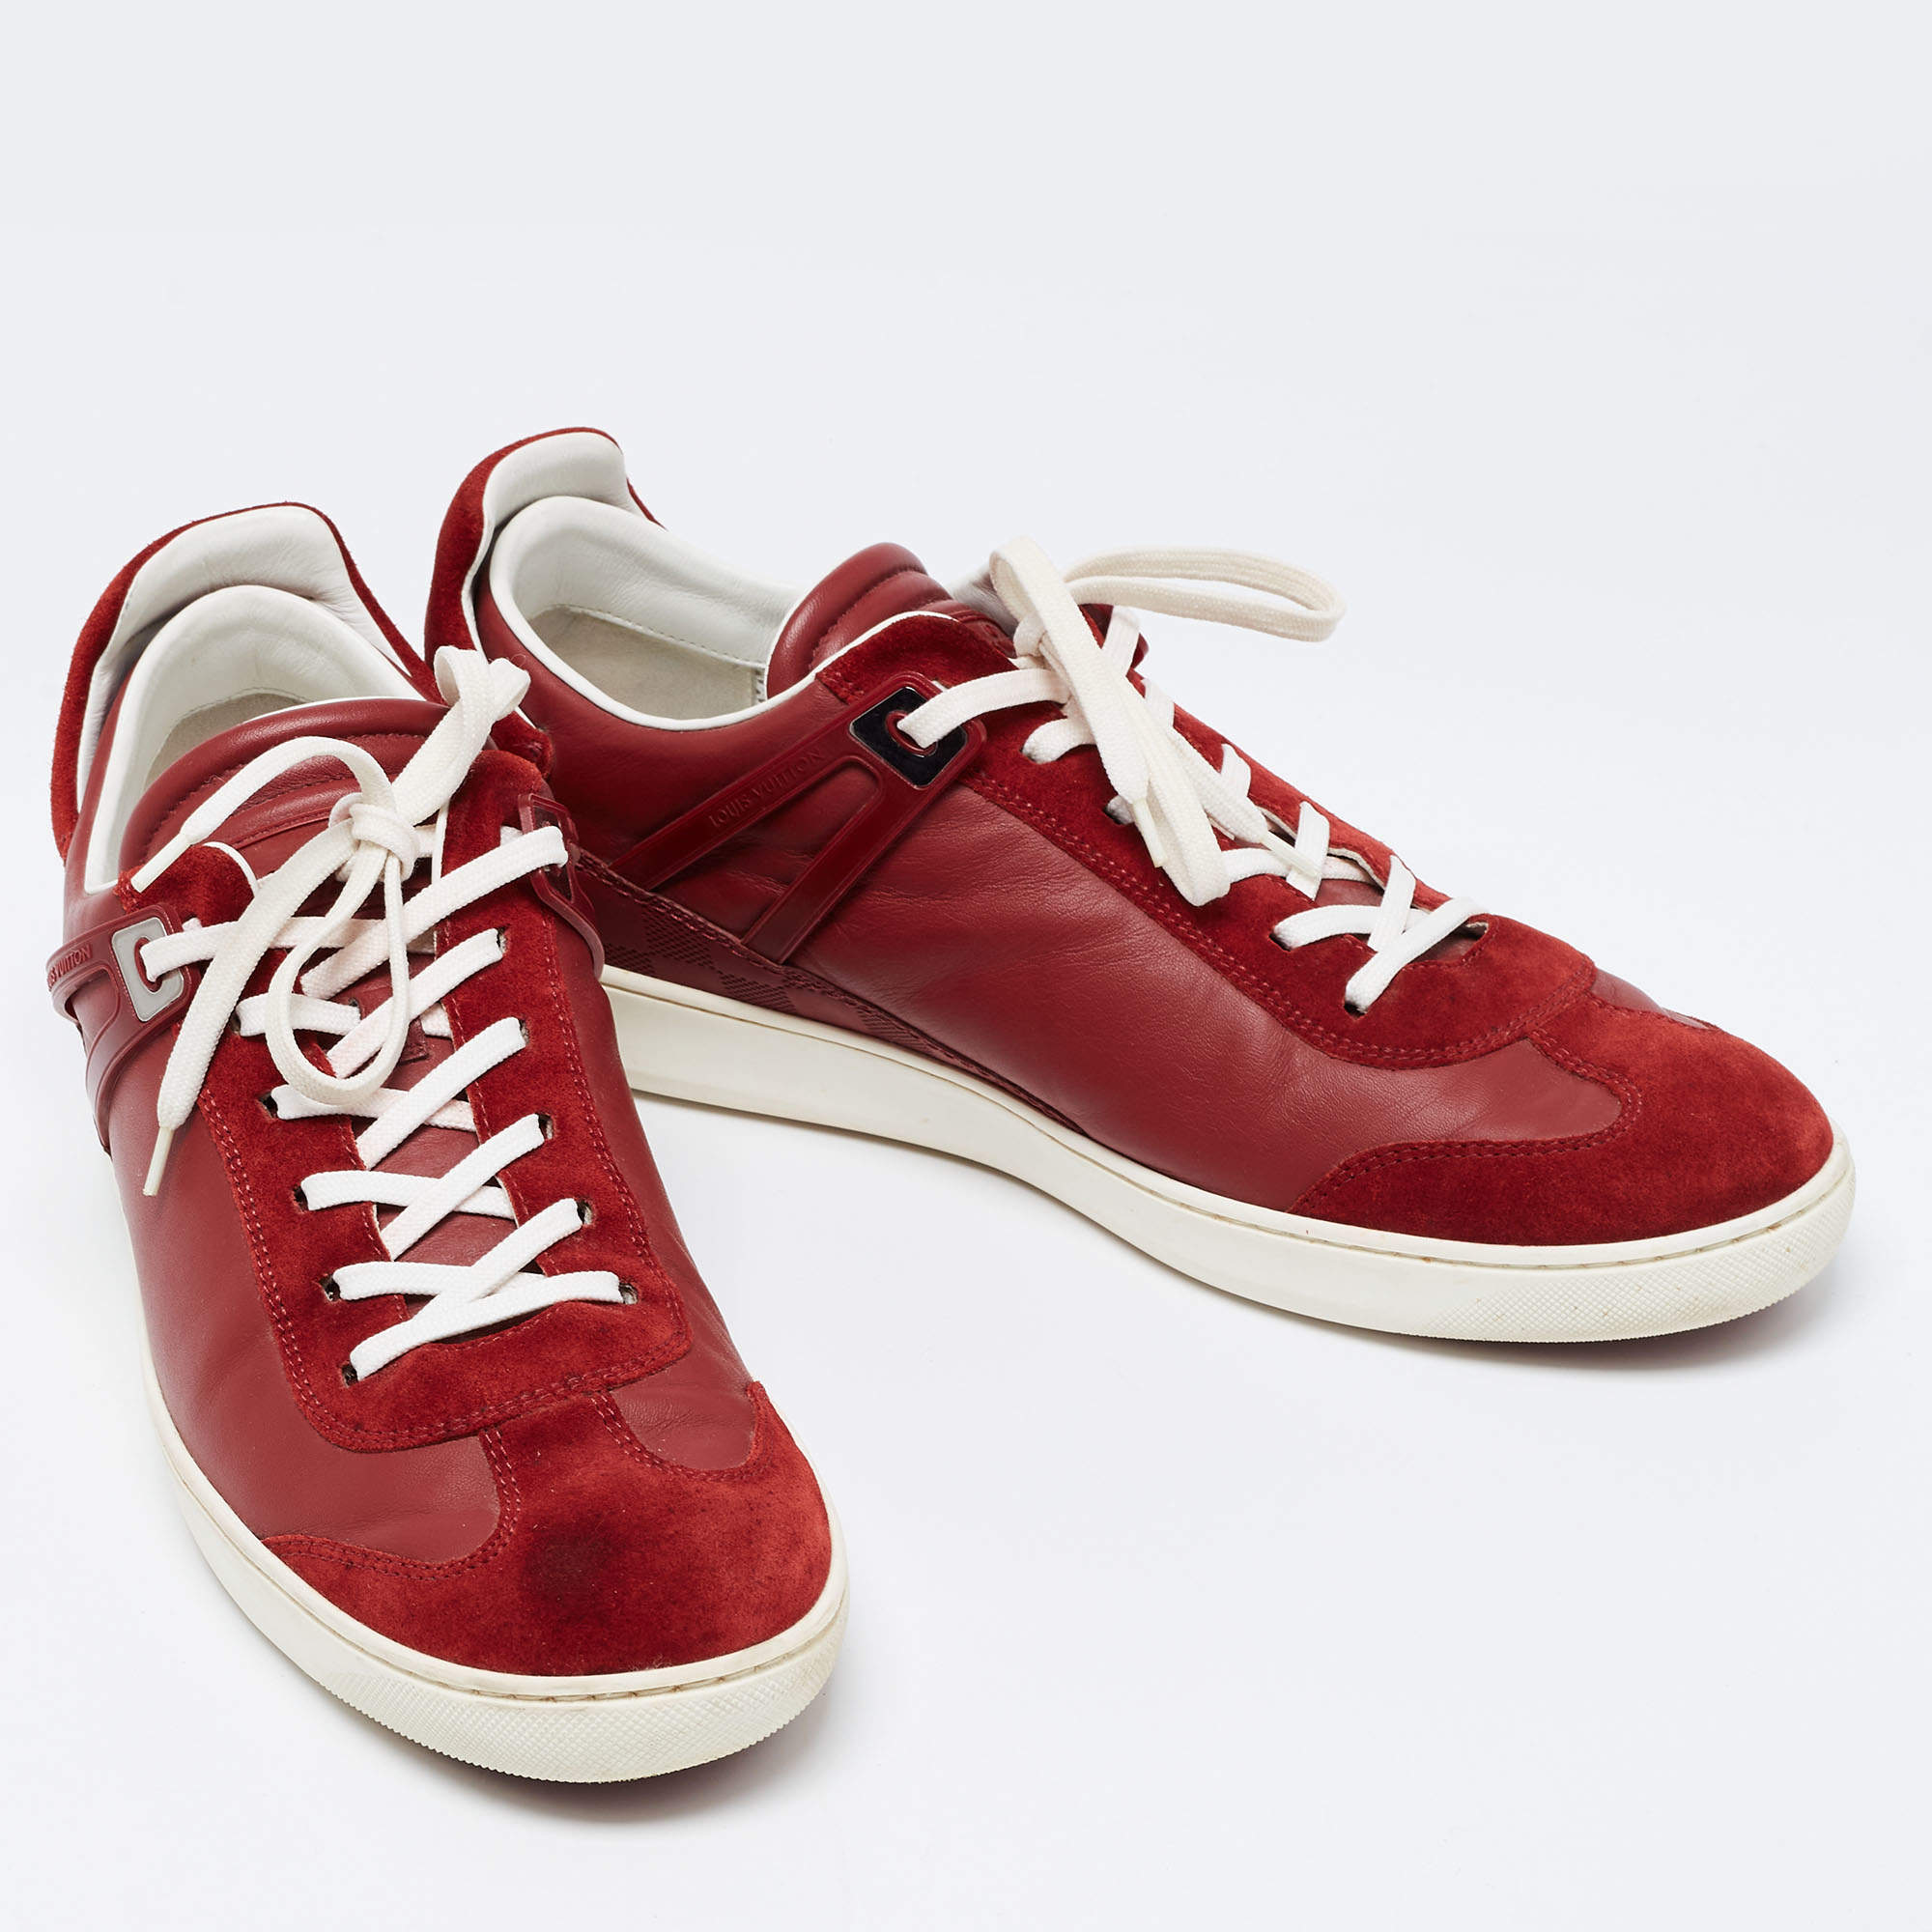 Louis Vuitton Red Suede And Nylon Low Top Sneakers Size 43.5 Louis Vuitton